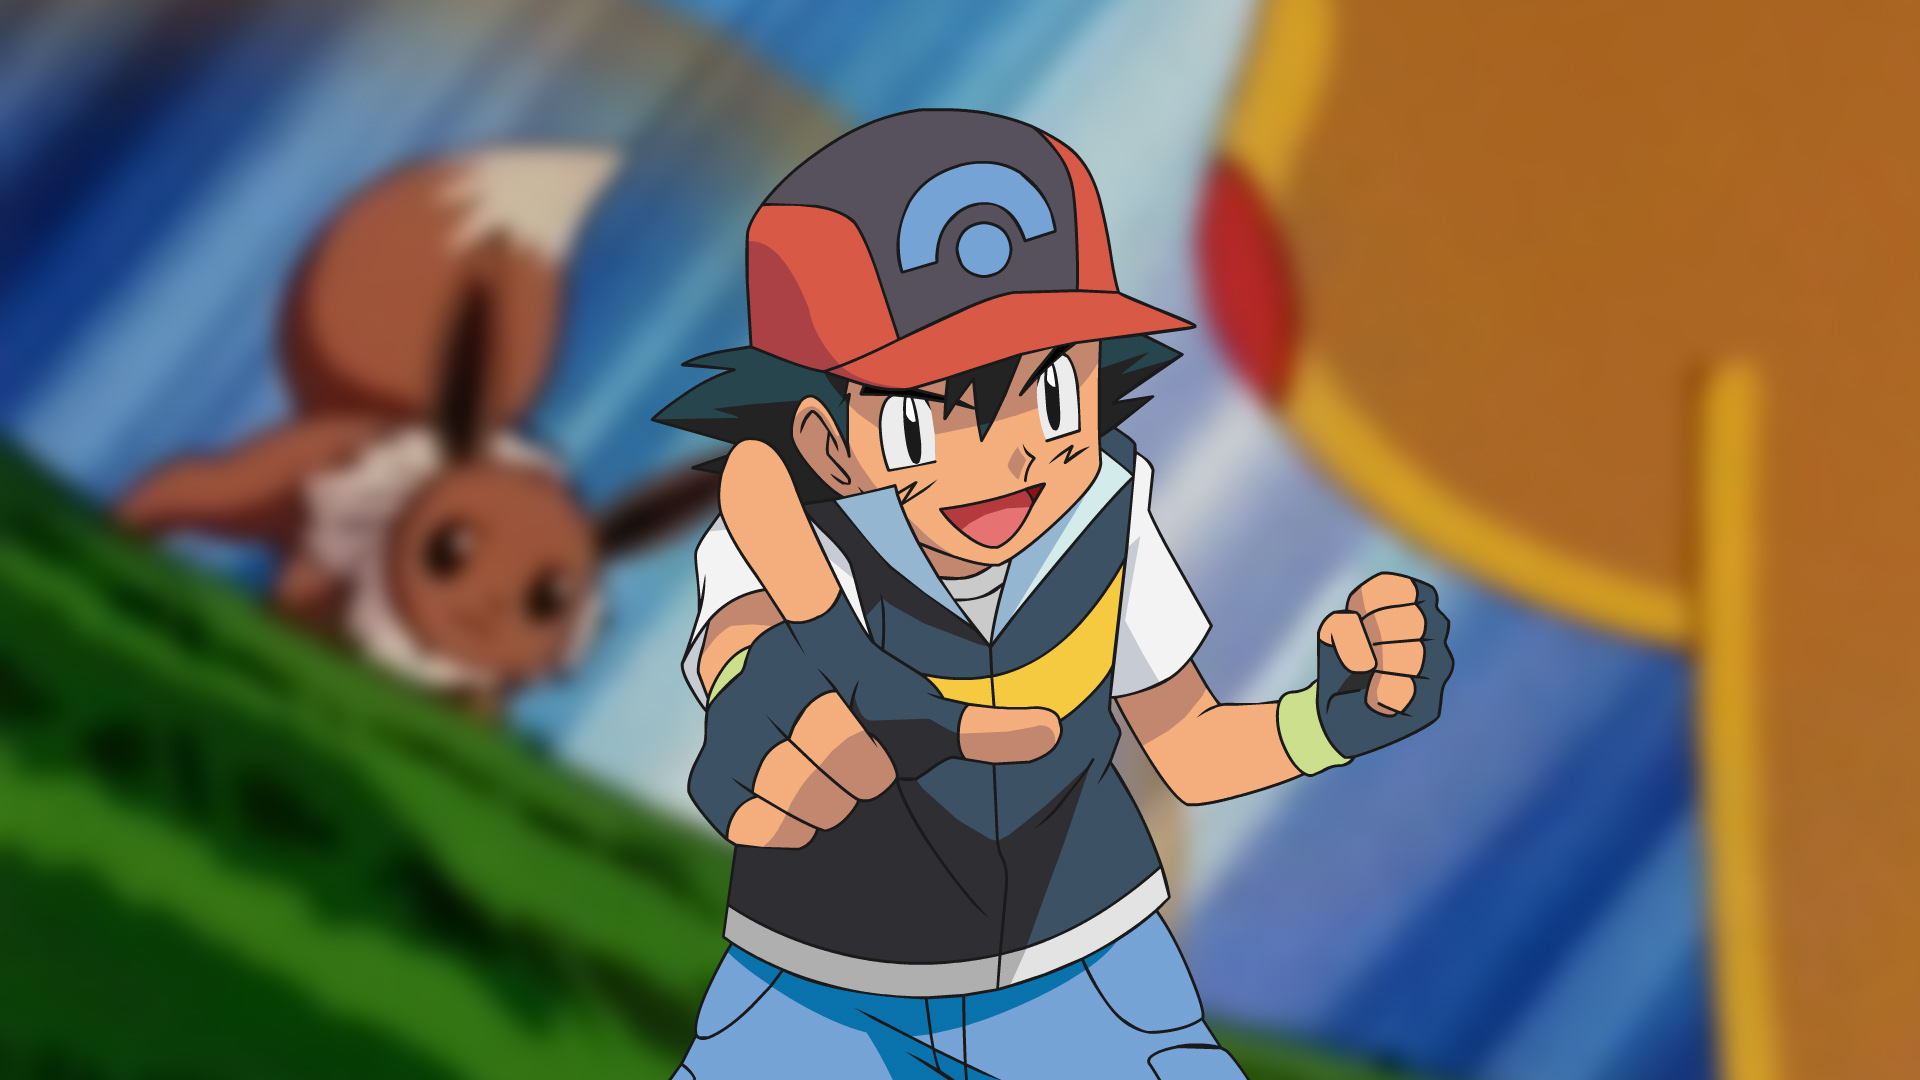 Ash Ketchum has competed in six different regional Pokémon League events ov...